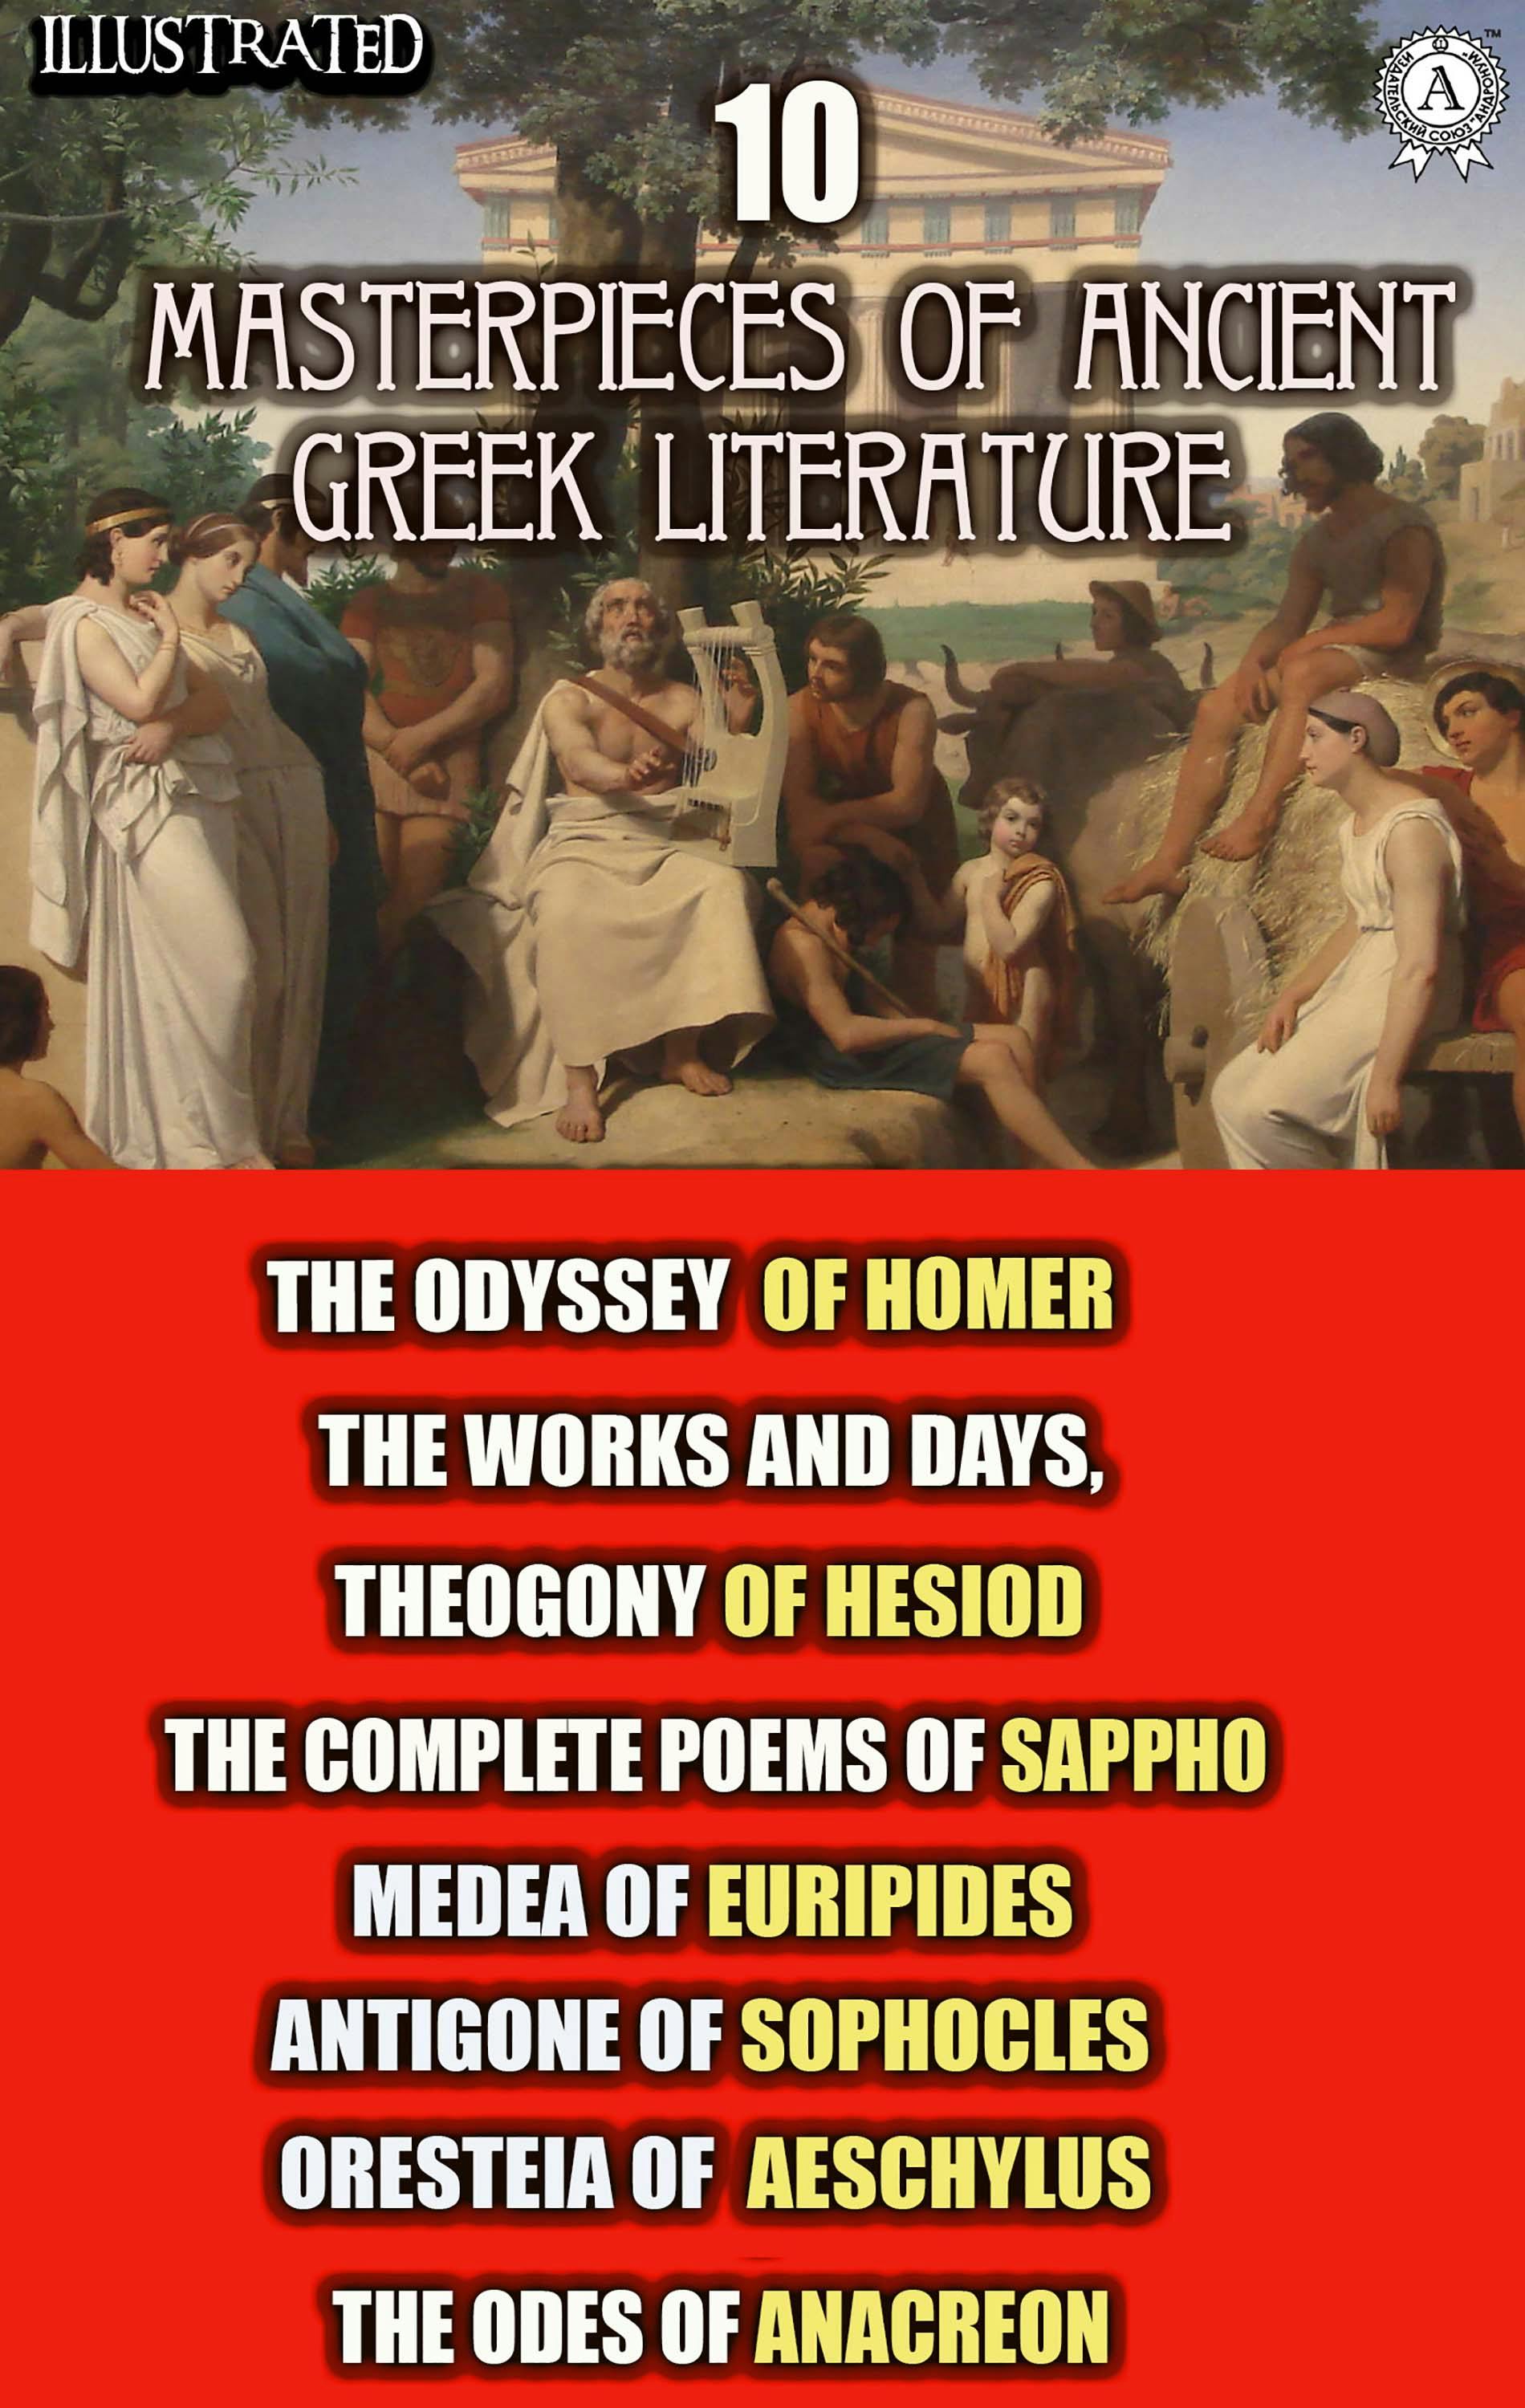 10 Masterpieces of Ancient Greek Literature: The Odyssey of Homer, The Works and Days, Theogony of Hesiod, The Complete Poems of Sappho, Medea of Euripides, Antigone of Sophocles, Oresteia of Aeschylus, The Odes of Anacreon - undefined